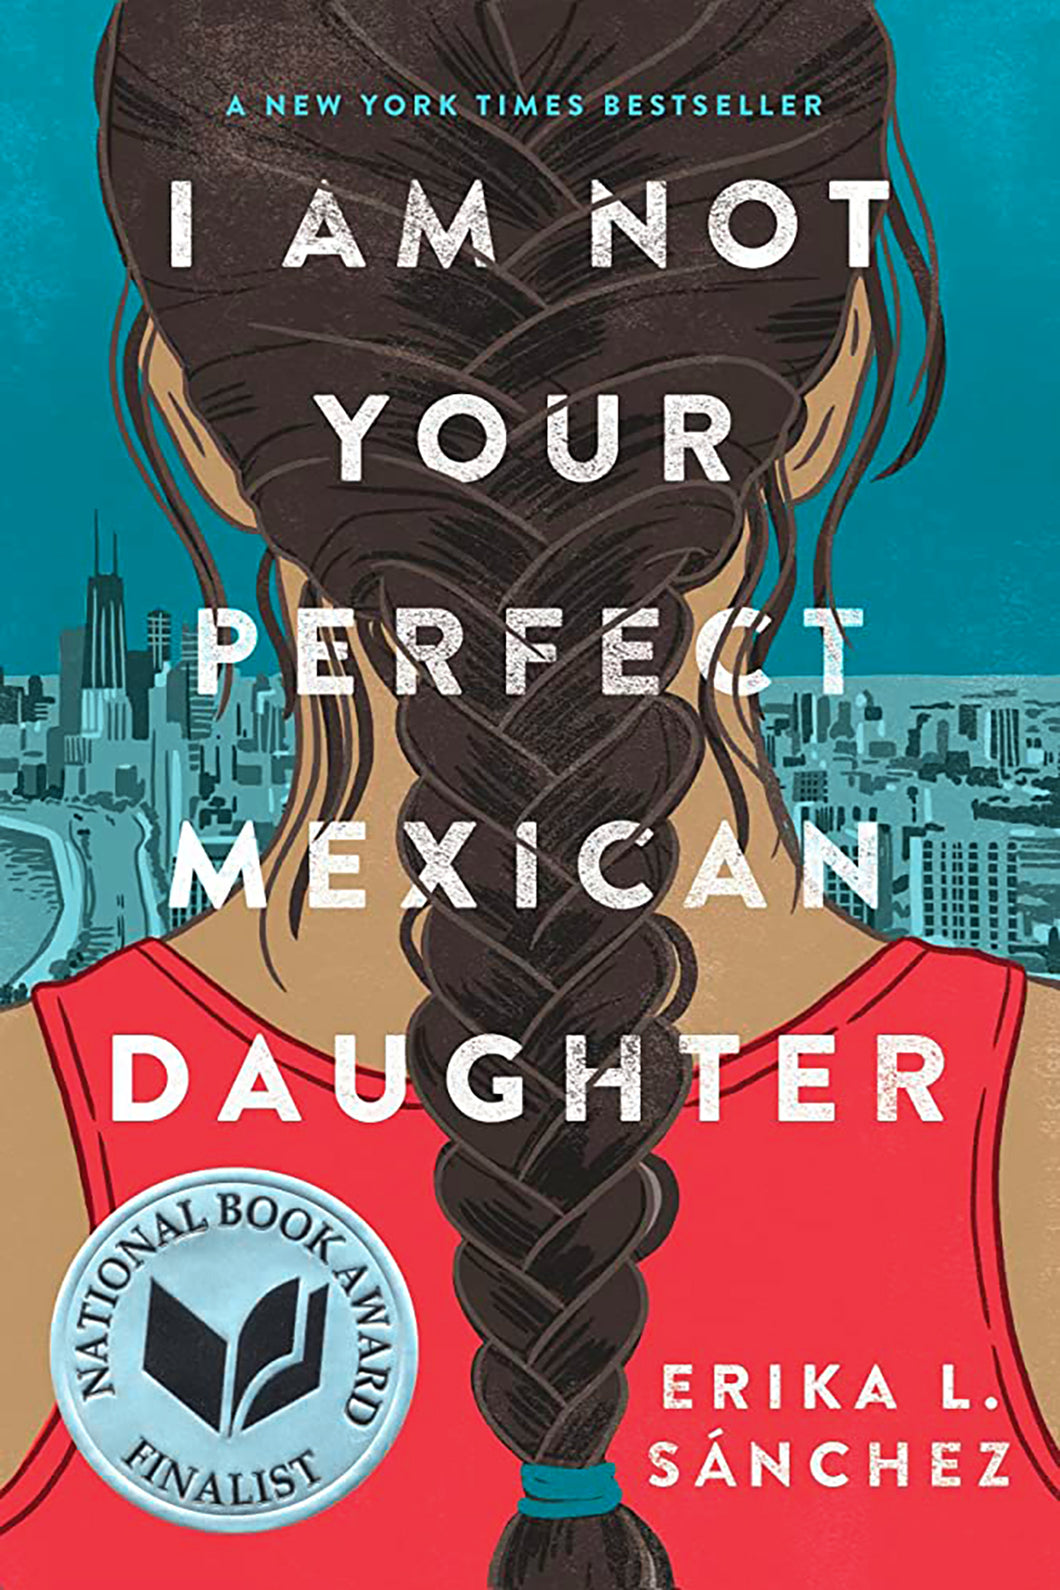 I Am Not Your Perfect Mexican Daughter by Erika L. Sánchez / Hardcover or Paperback - NEW BOOK (English or Spanish)